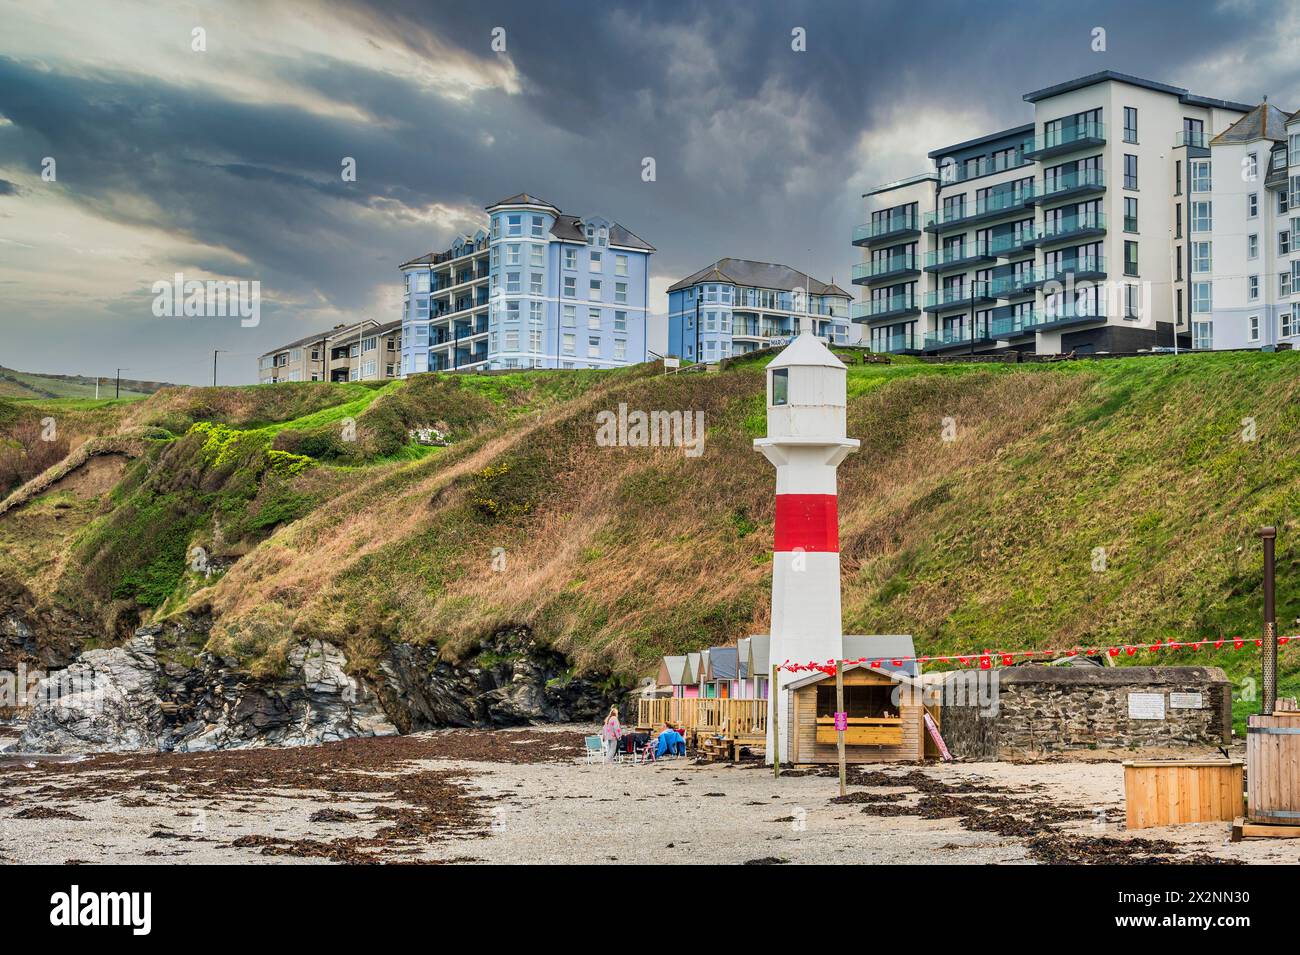 Beach scenic image looking towards the Lookout Tower at the coastal resort town of Port Erin on the southwestern tip of the Isle of Man Stock Photo